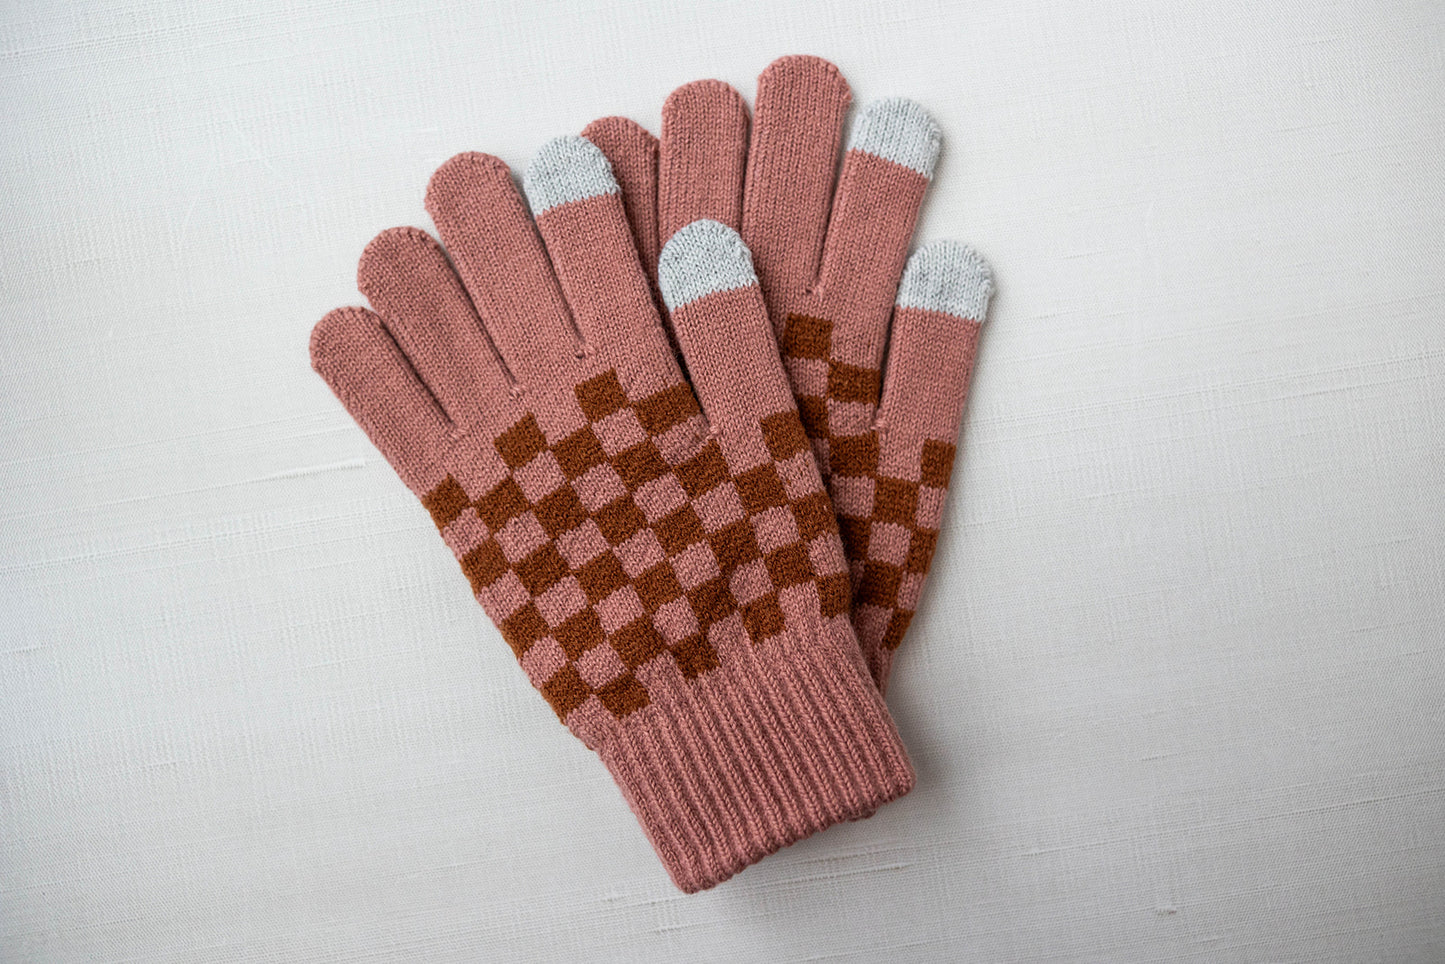 checkered gloves in soft pink